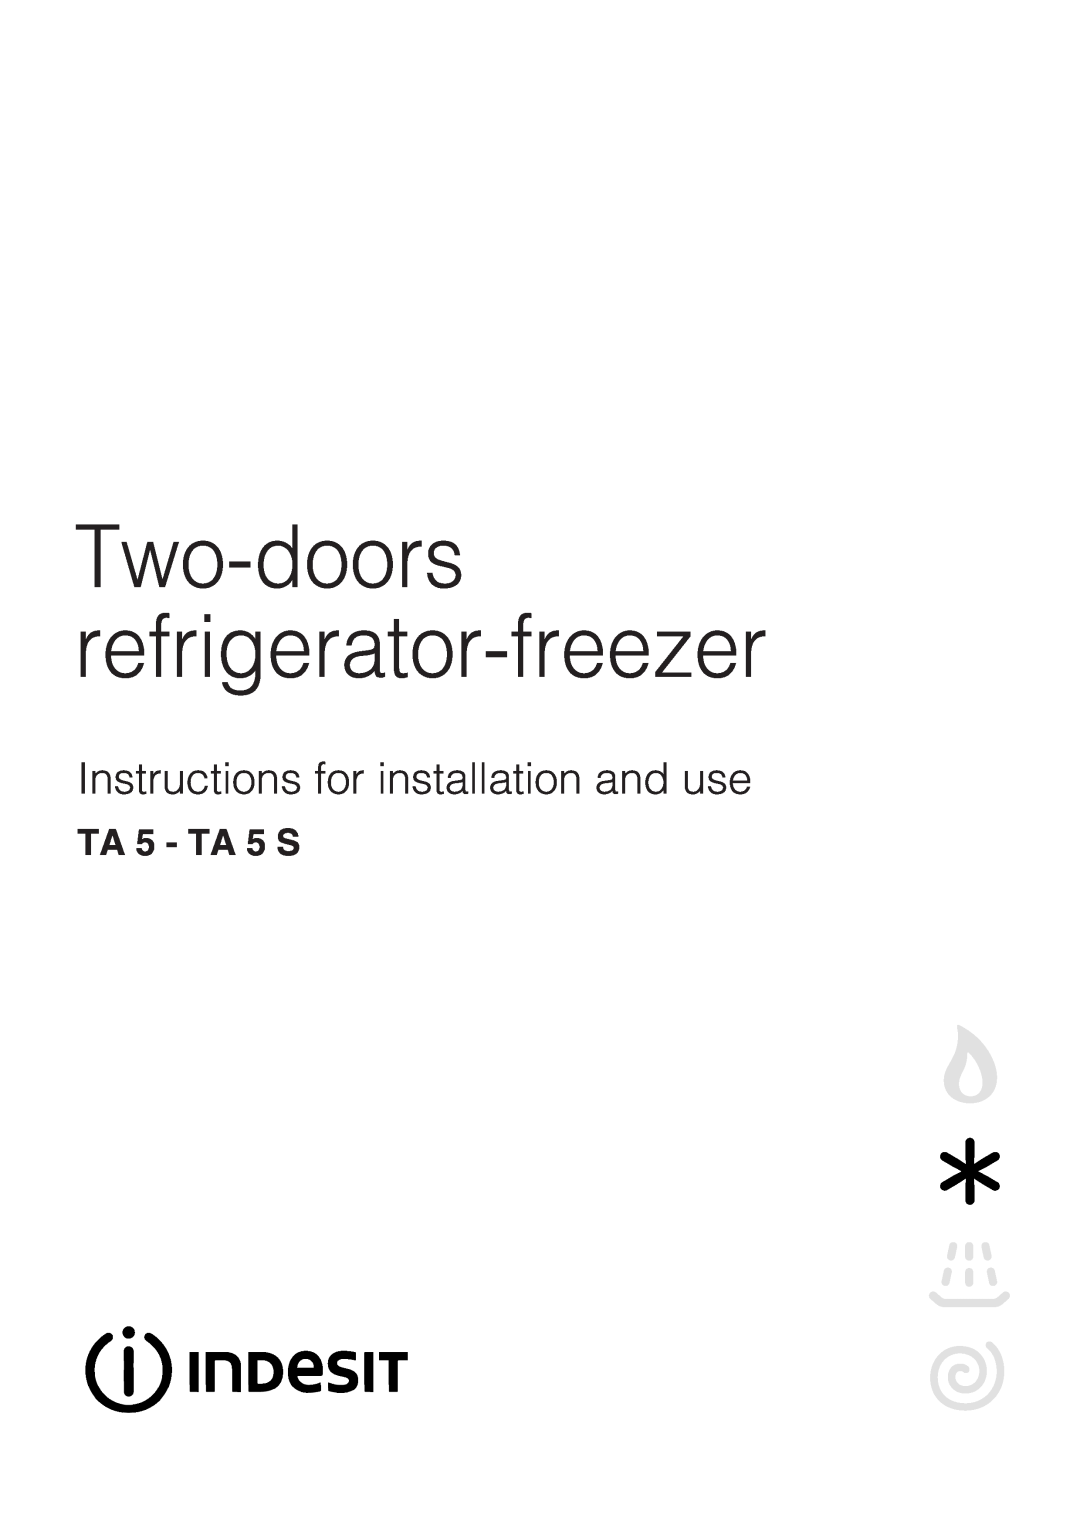 Indesit TA5-TA5S manual TA 5 - TA 5 S, Two-doors refrigerator-freezer, Instructions for installation and use 